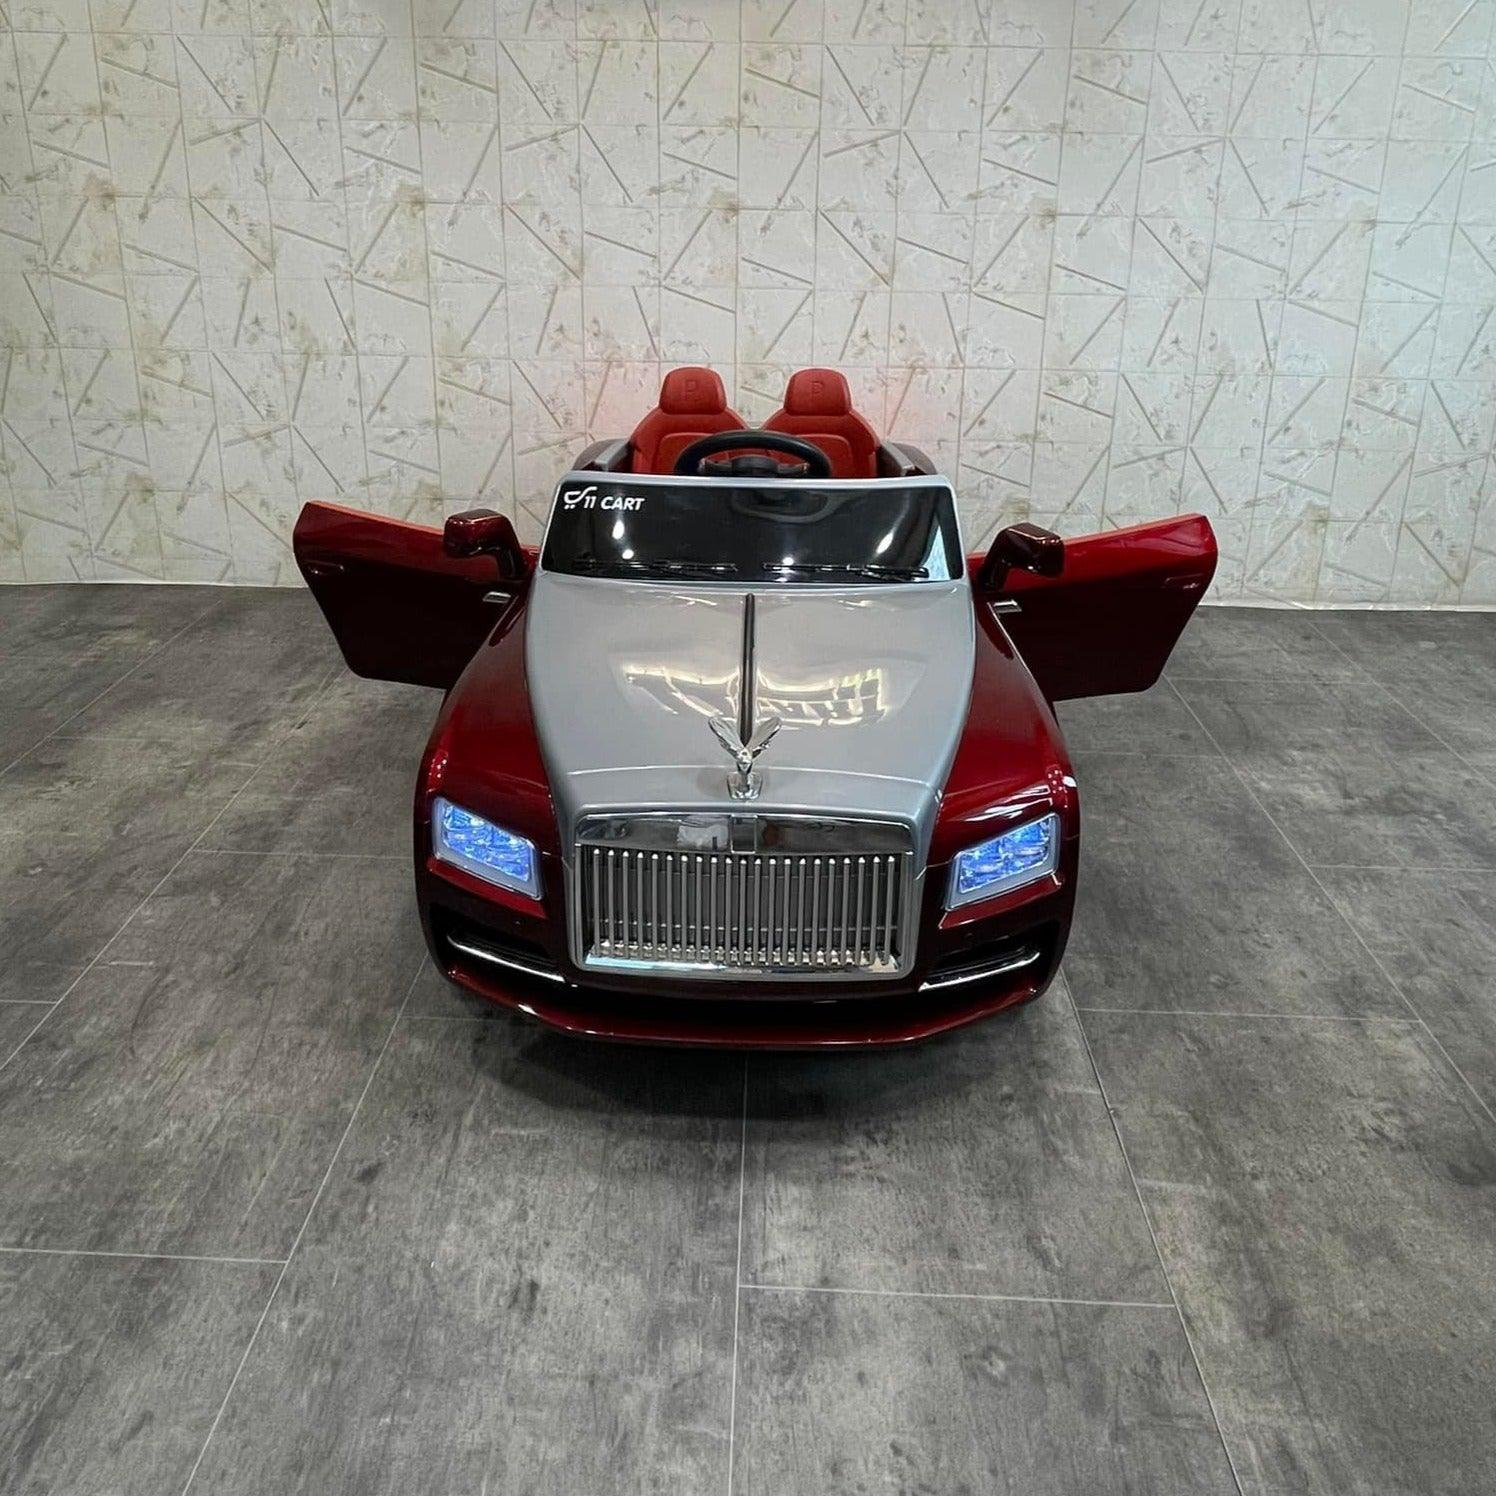 Rolls Royce Electric Ride on Car for Kids & Toddlers with Remote Control - Red - 11Cart